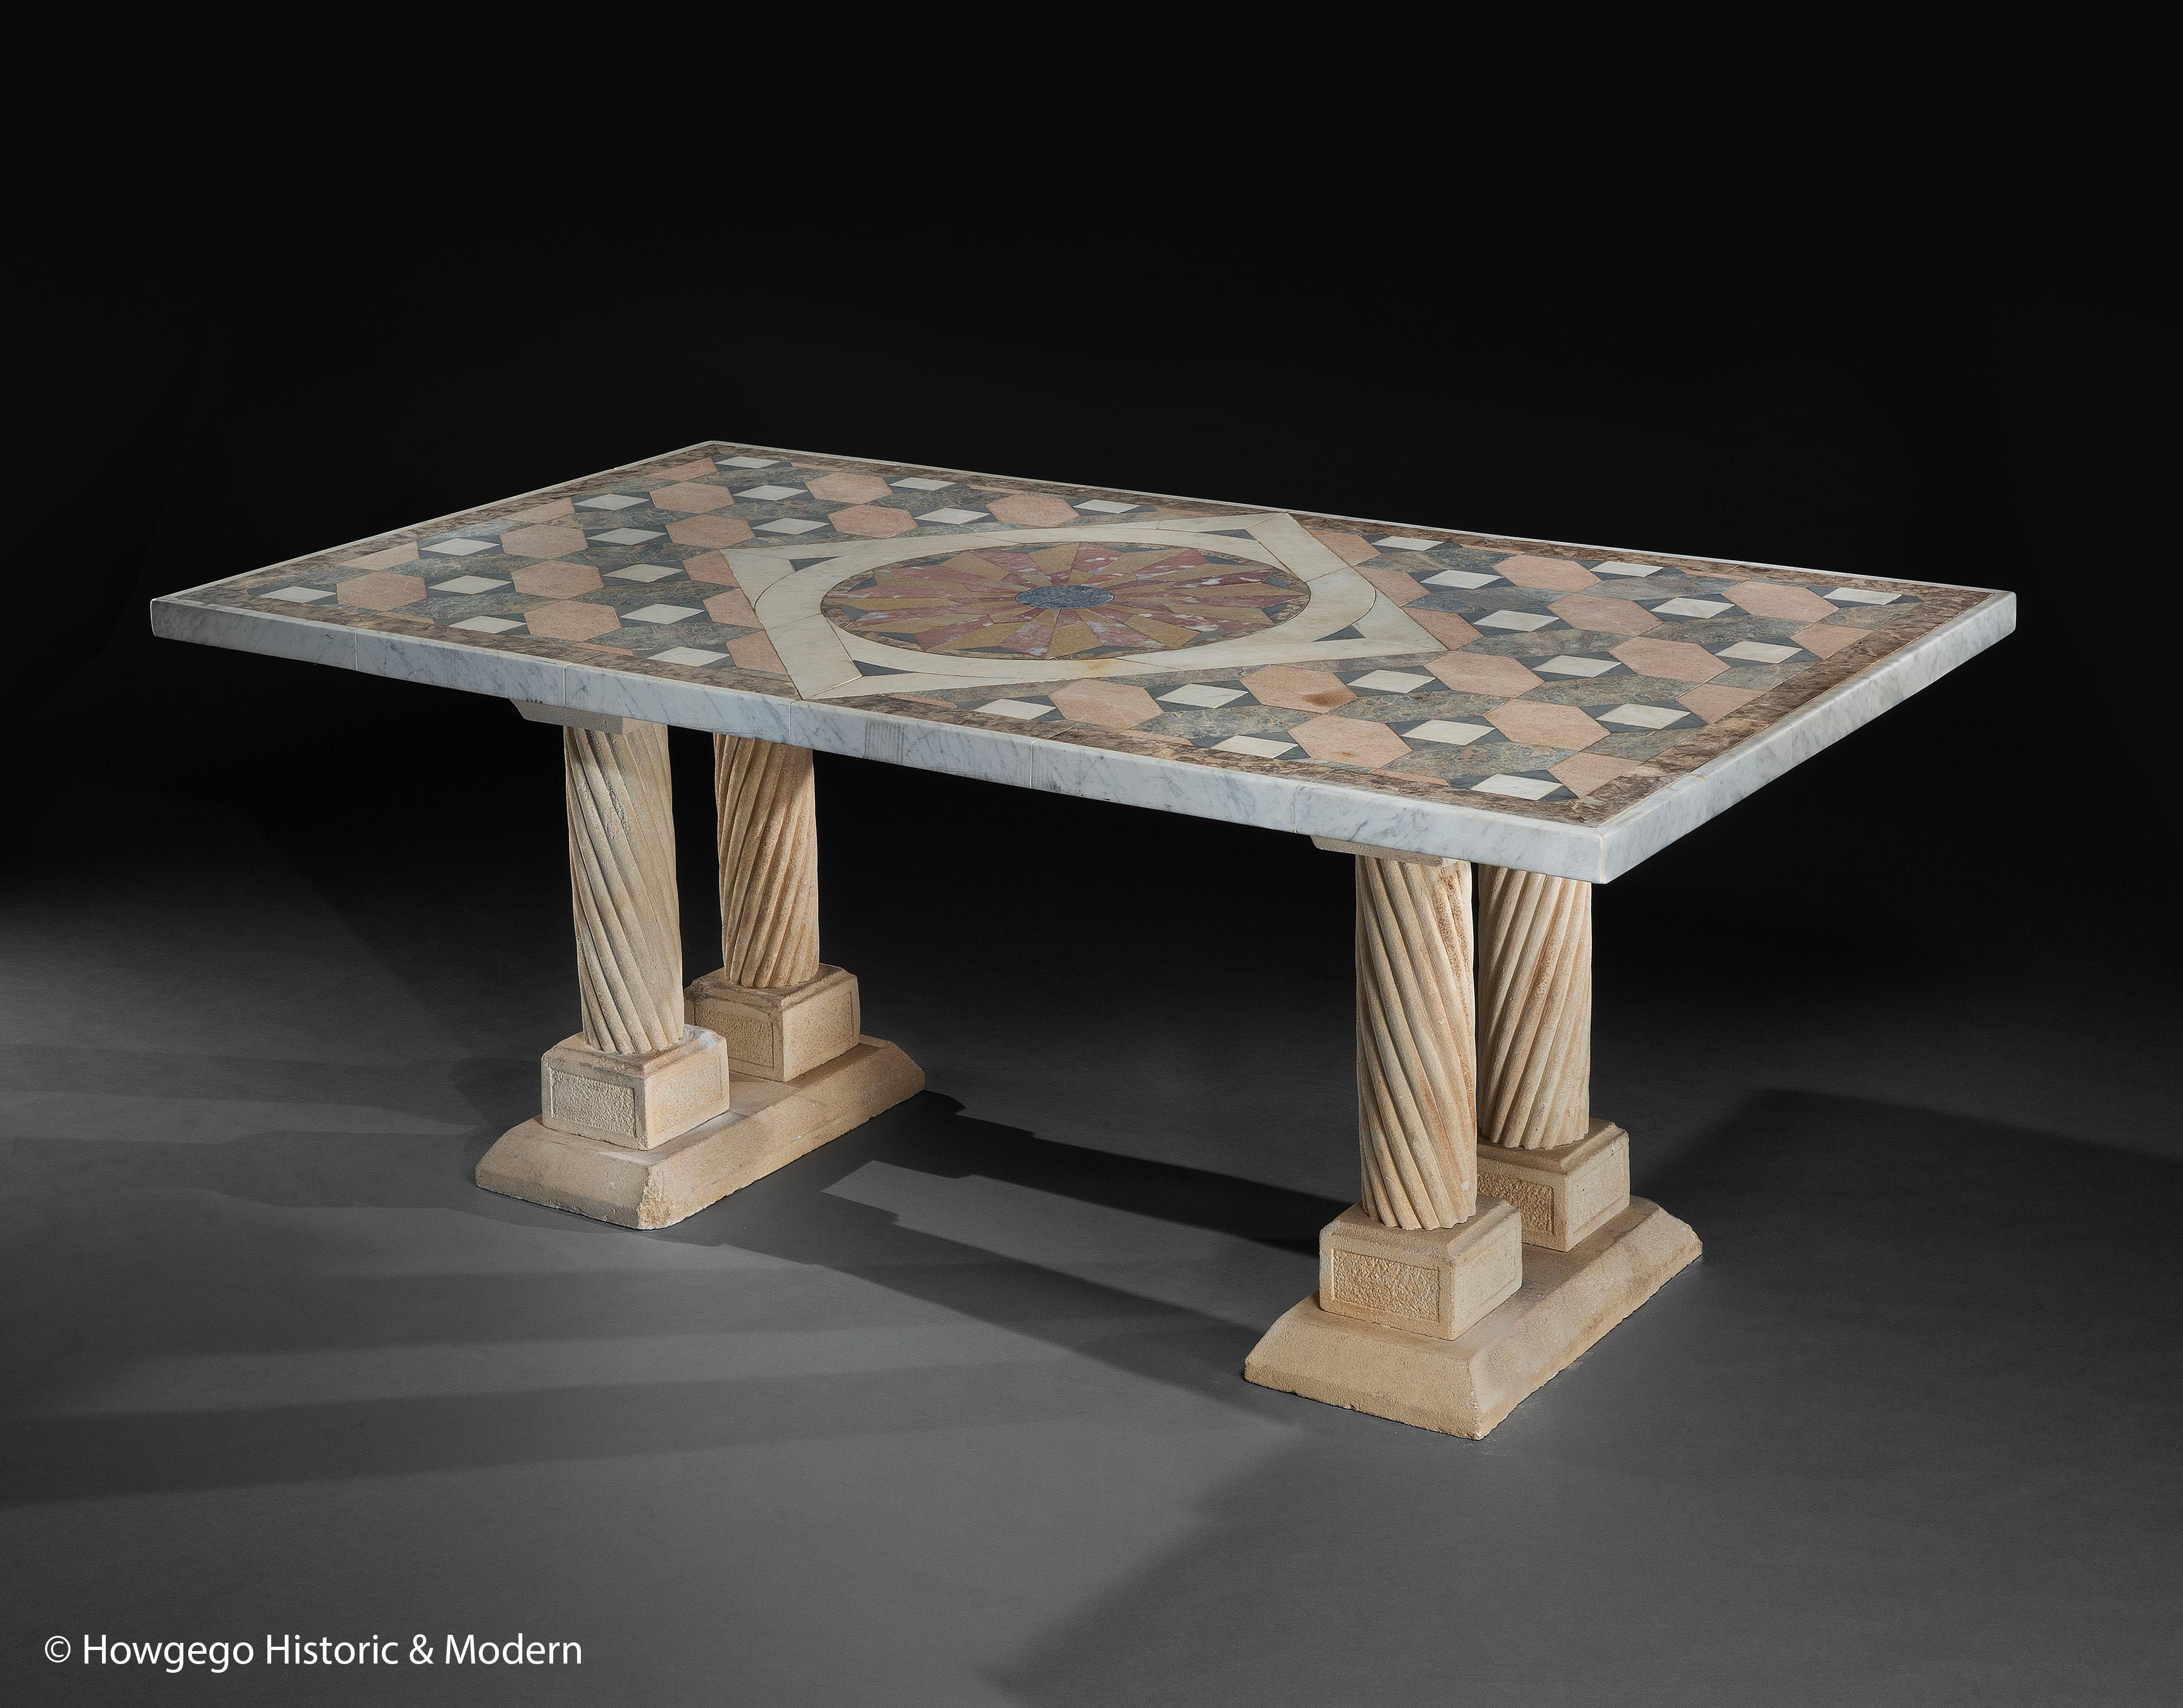 Striking table in the Roman classical style inset with beautiful earth palette marble specimens around a lapis lazulli centre
Suitable for everyday use either outside or in an interior
Has been outside so the surface has a dry patina which can be